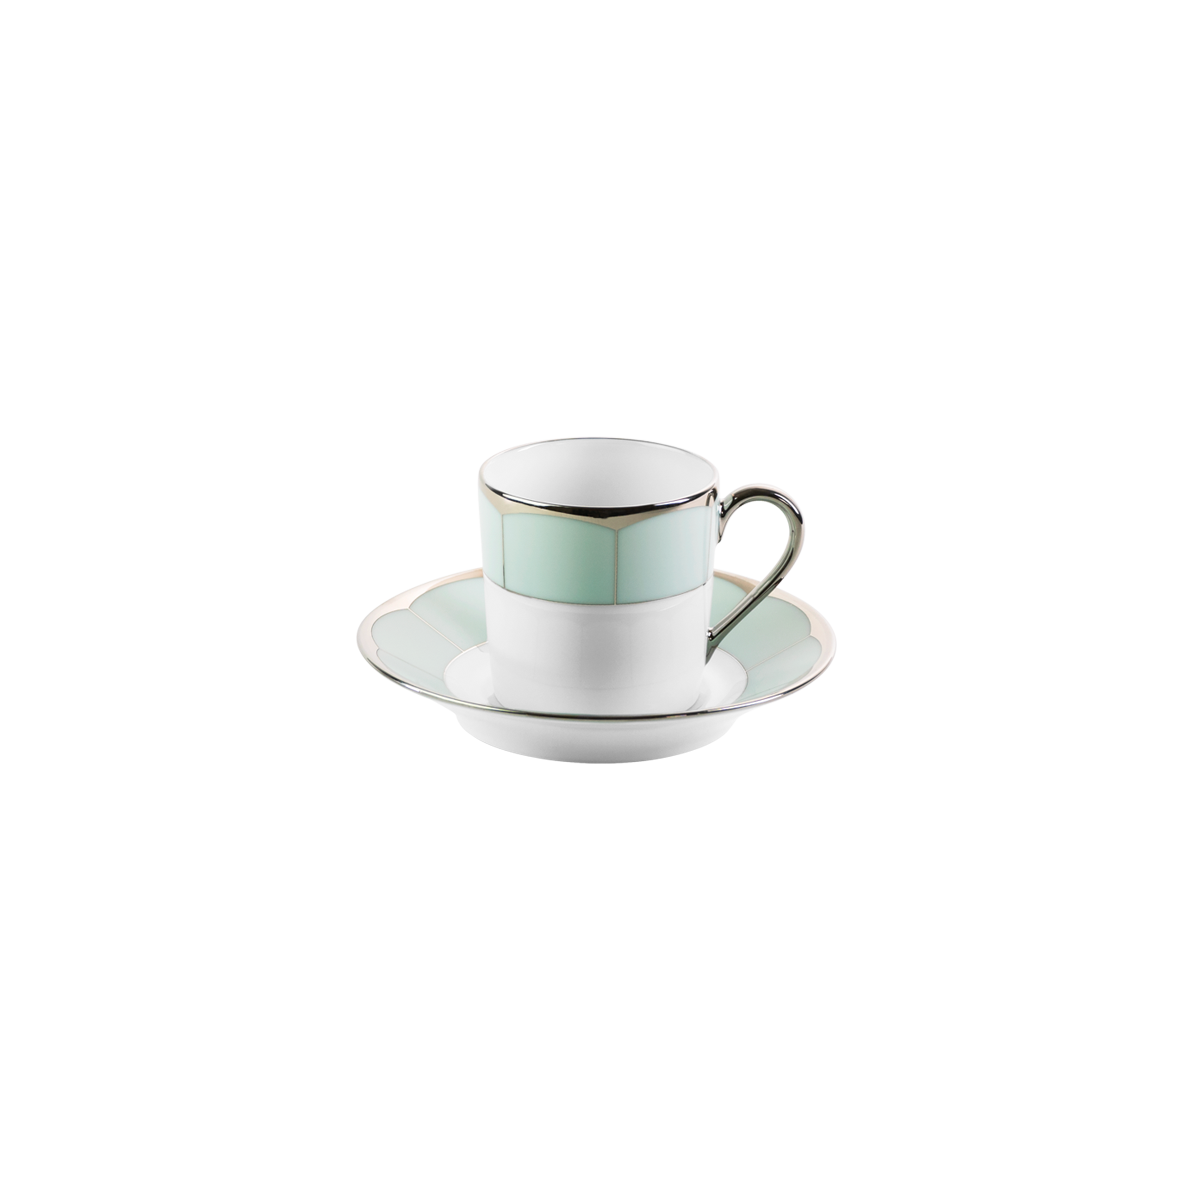 Illusion Coffee Cup And Saucer